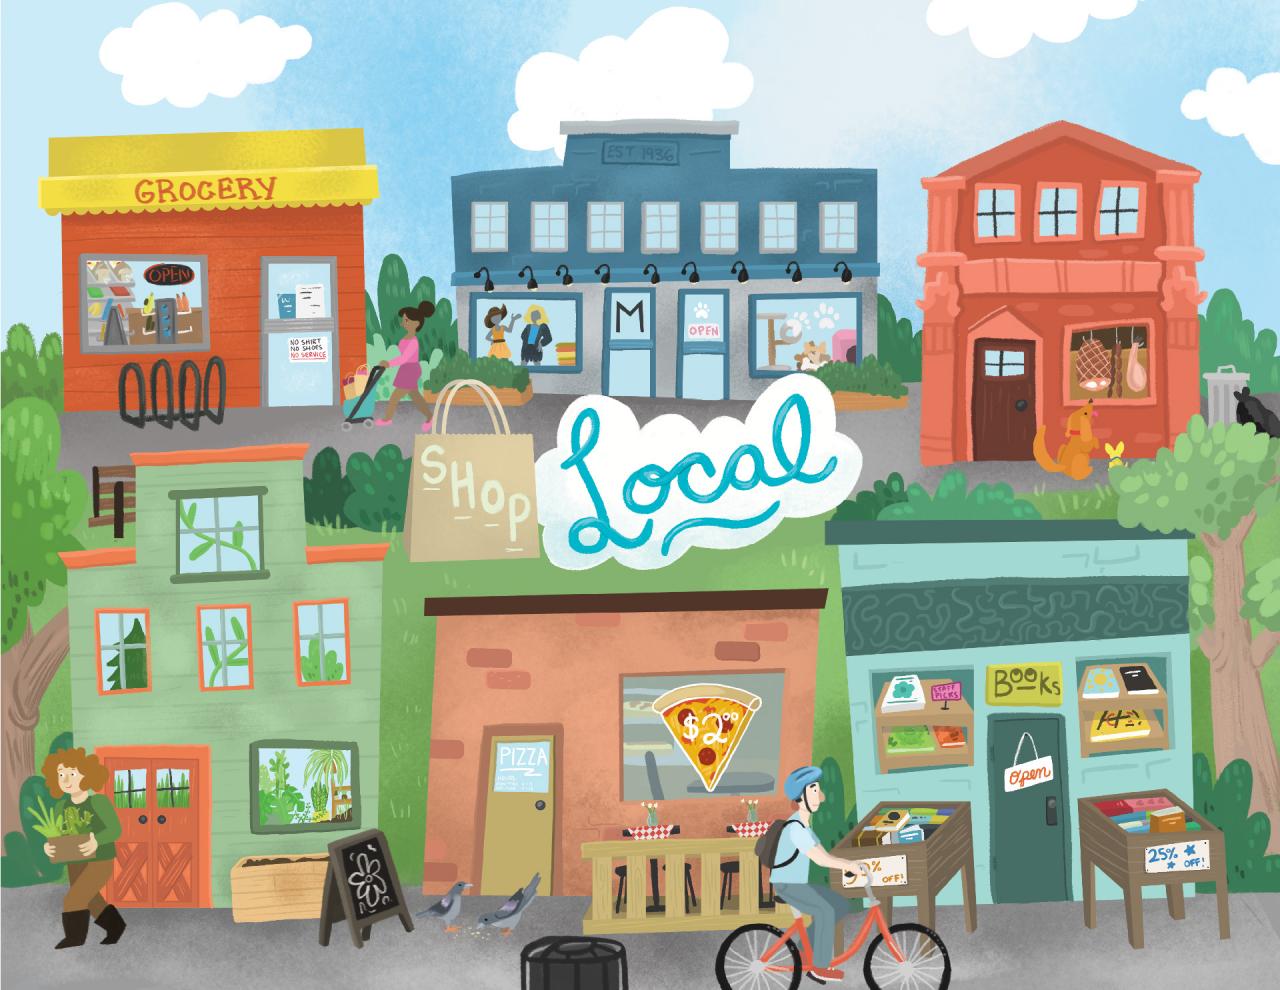 "Shop Local" community illustration featuring several colourful buildings 